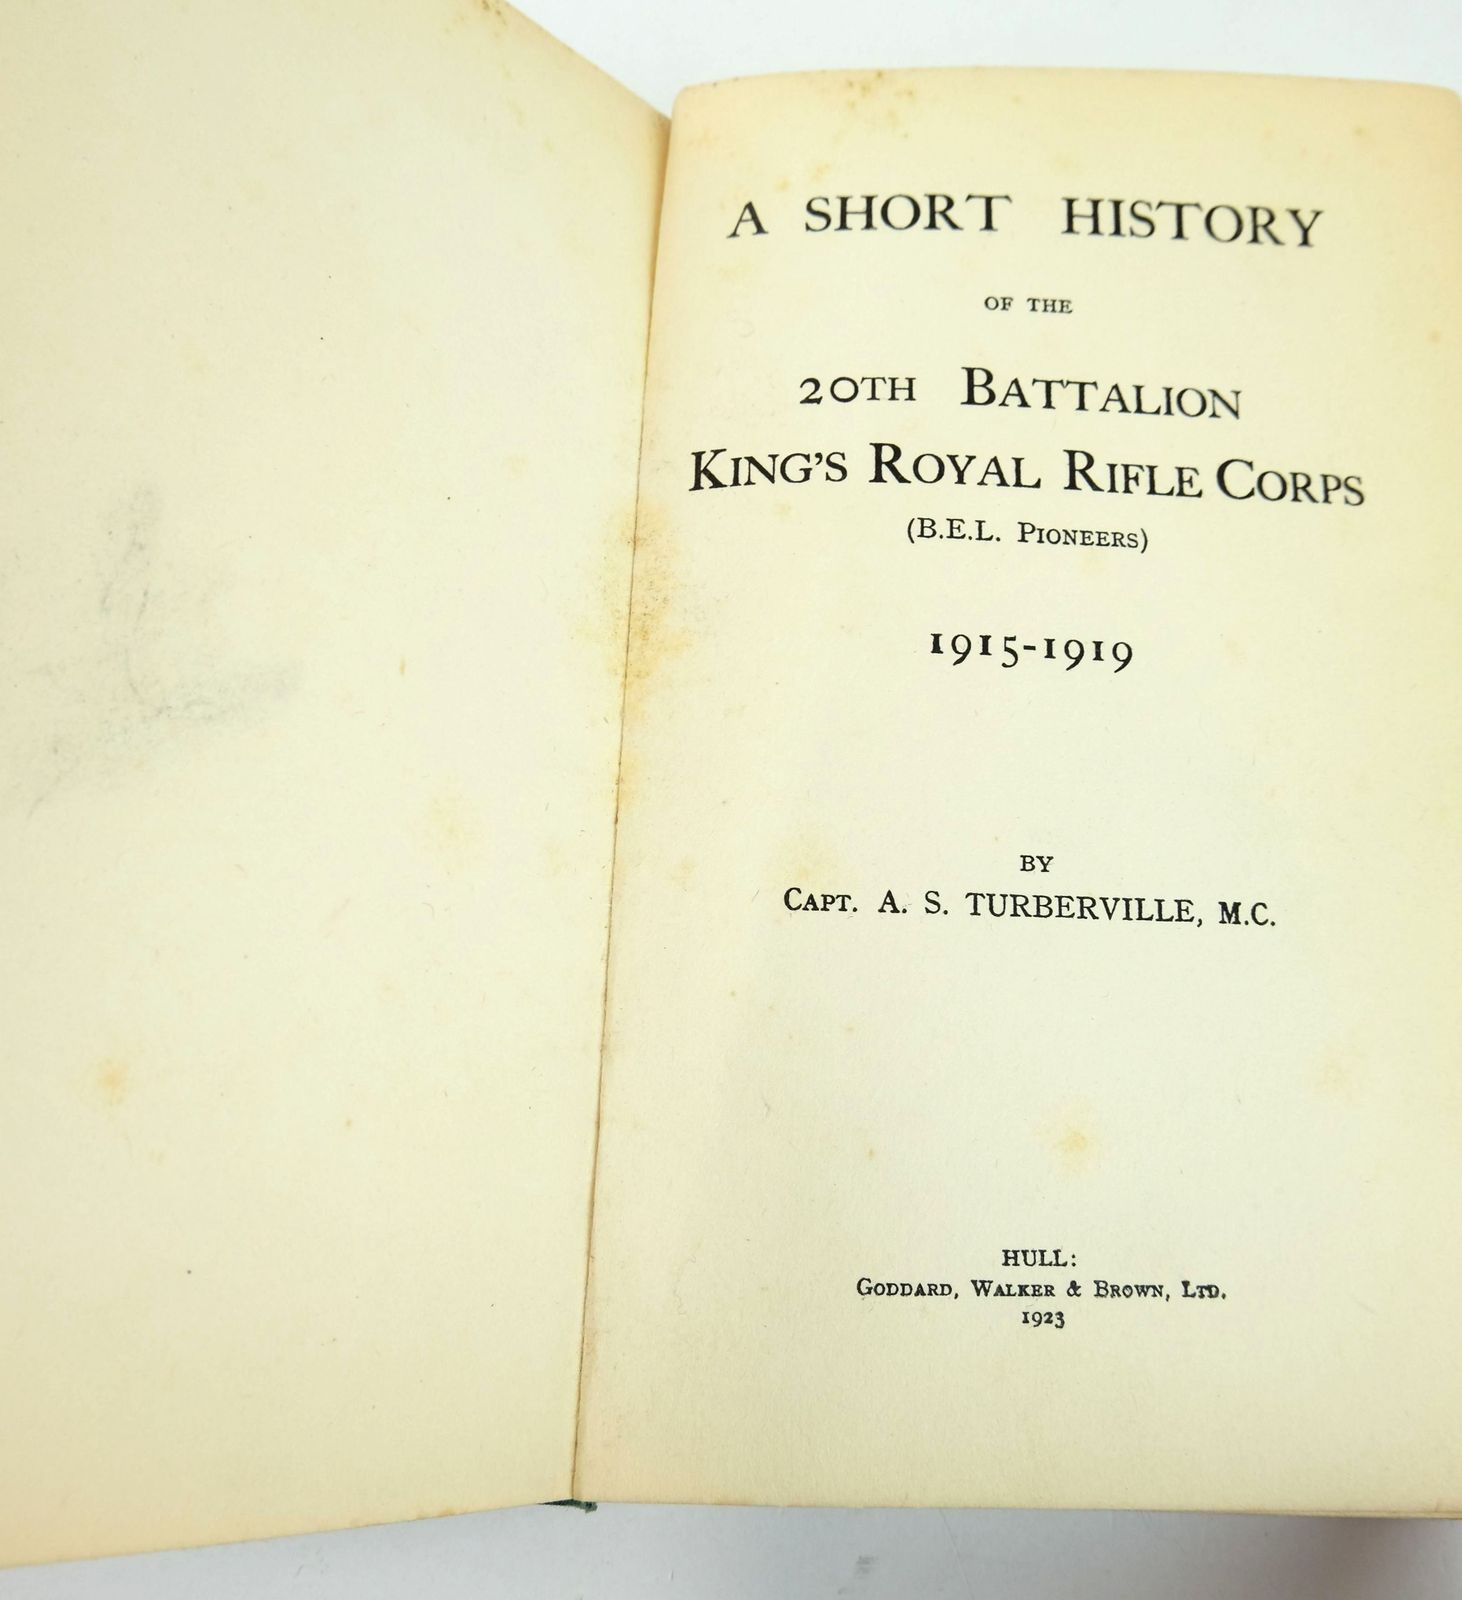 Photo of A SHORT HISTORY OF THE 20TH BATTALION KING'S ROYAL RIFLE CORPS (B.E.L. PIONEERS) 1915-1919 written by Turberville, A.S. published by Goddard, Walker & Brown, Ltd. (STOCK CODE: 1819230)  for sale by Stella & Rose's Books